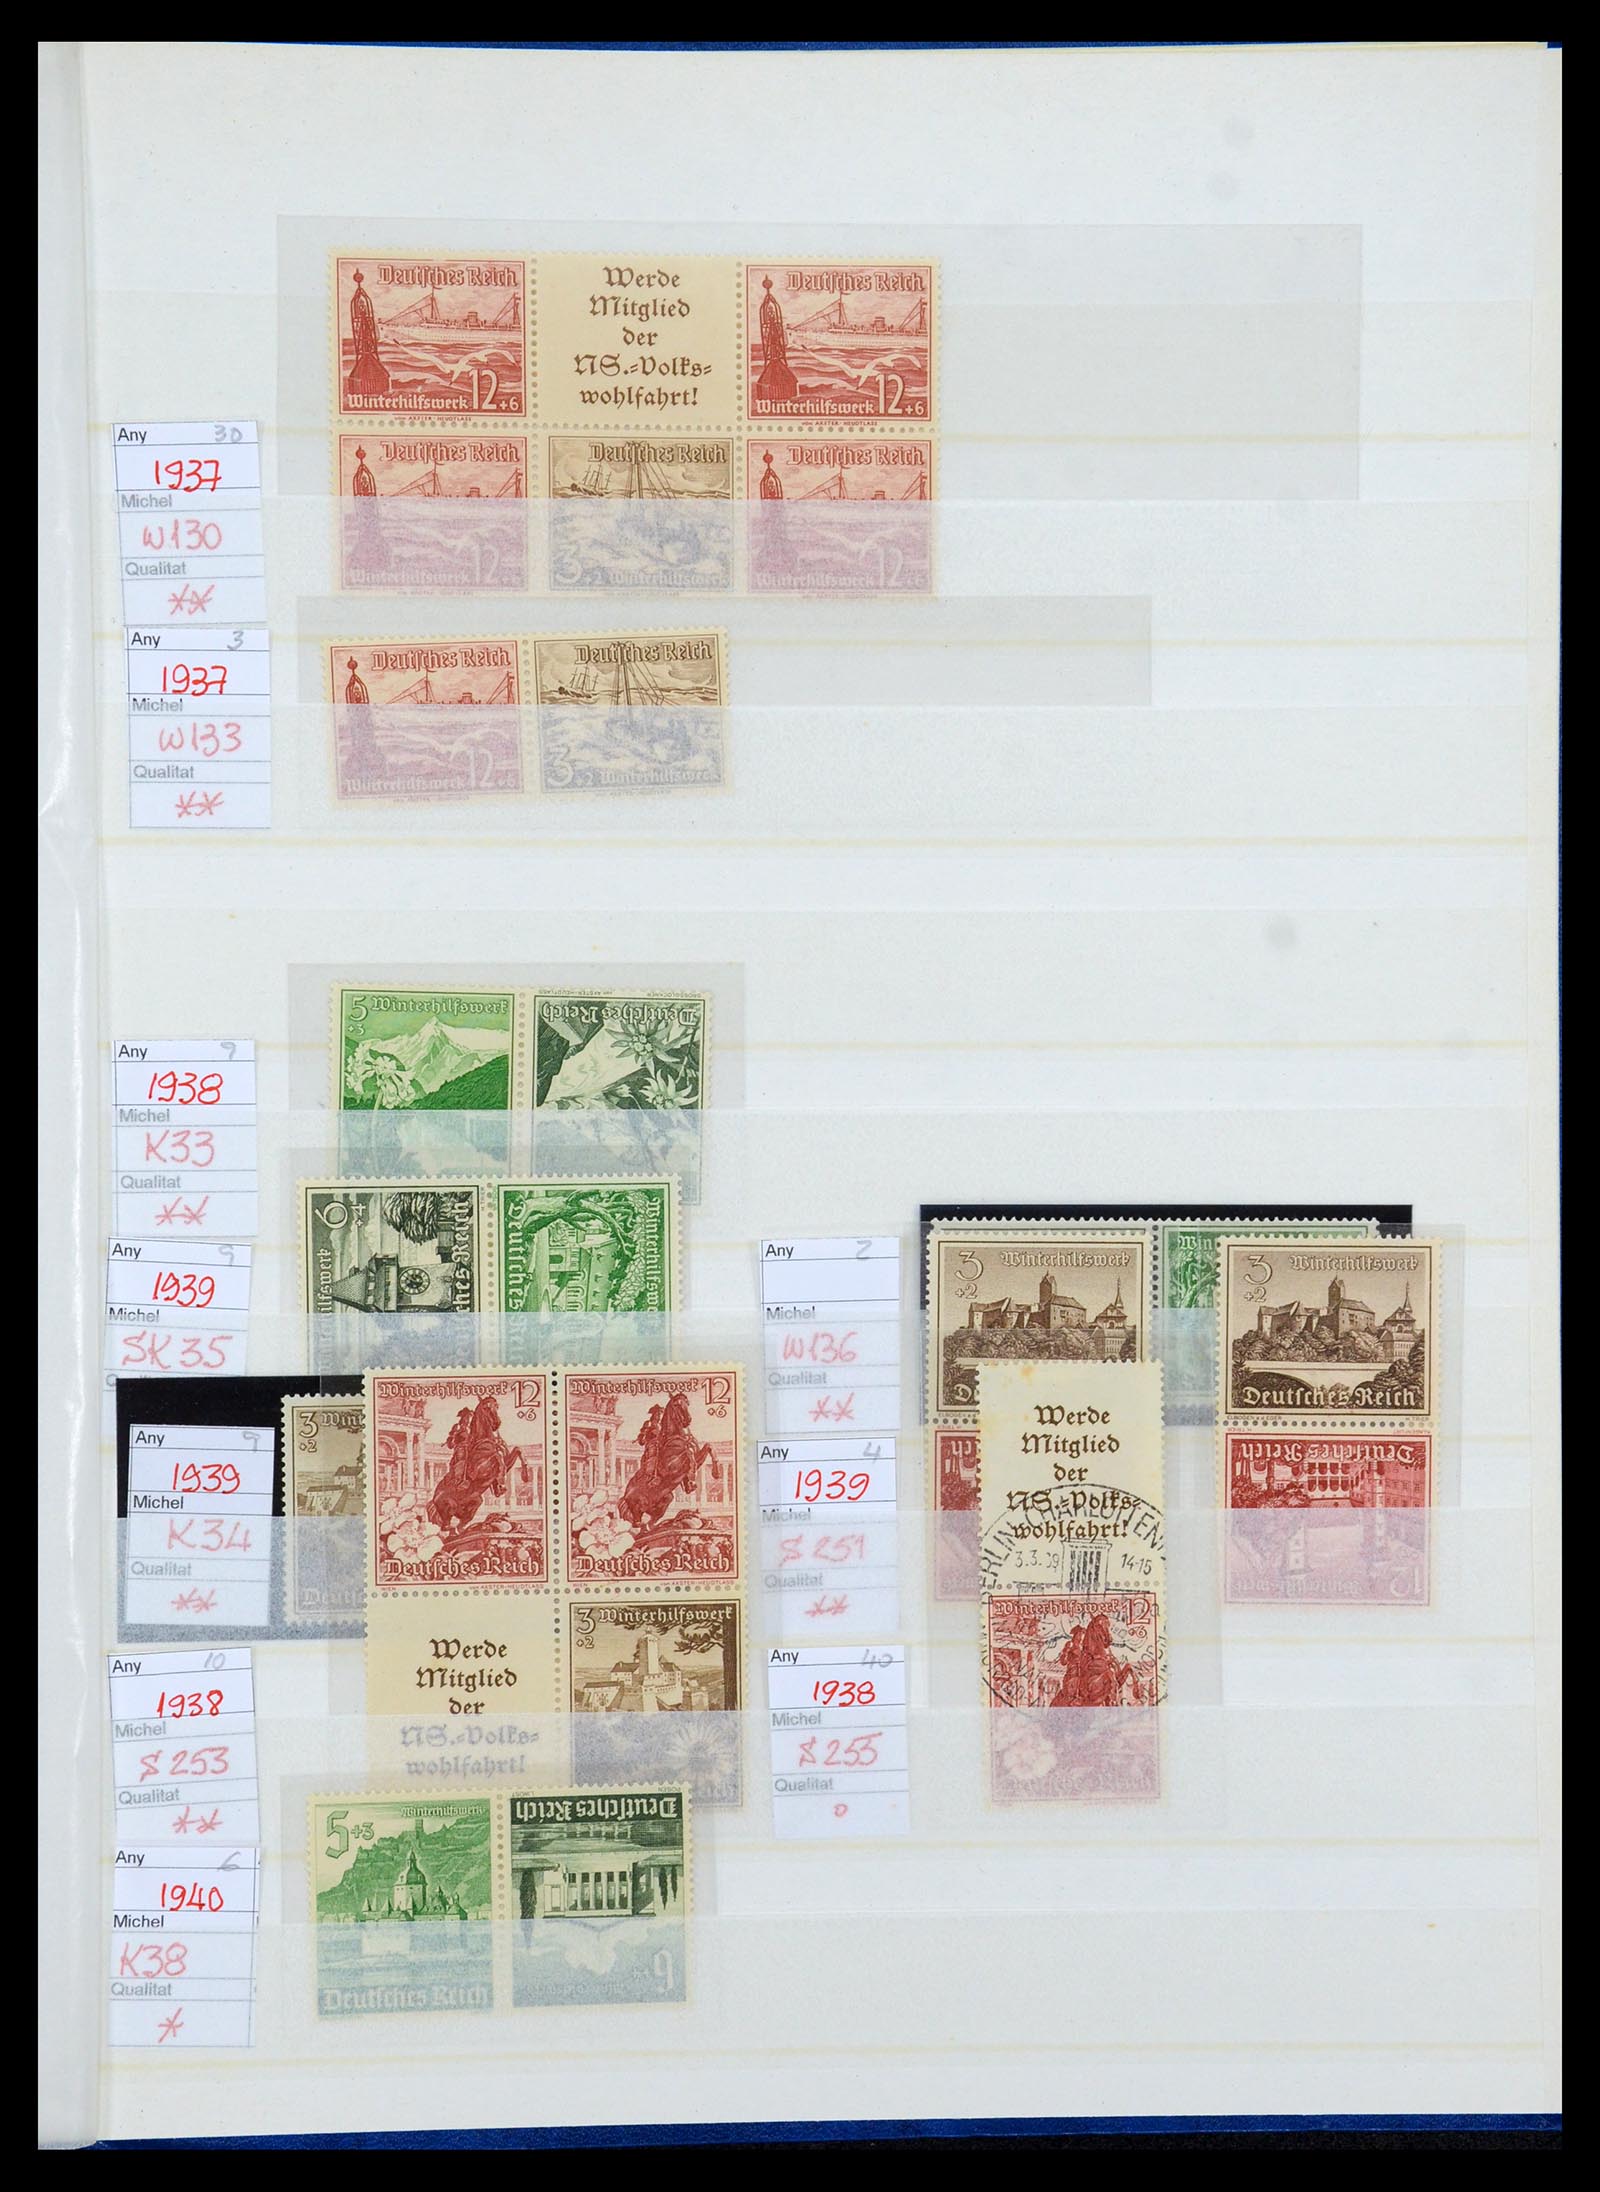 35875 023 - Stamp Collection 35875 German Reich booklet panes 1927-1939.